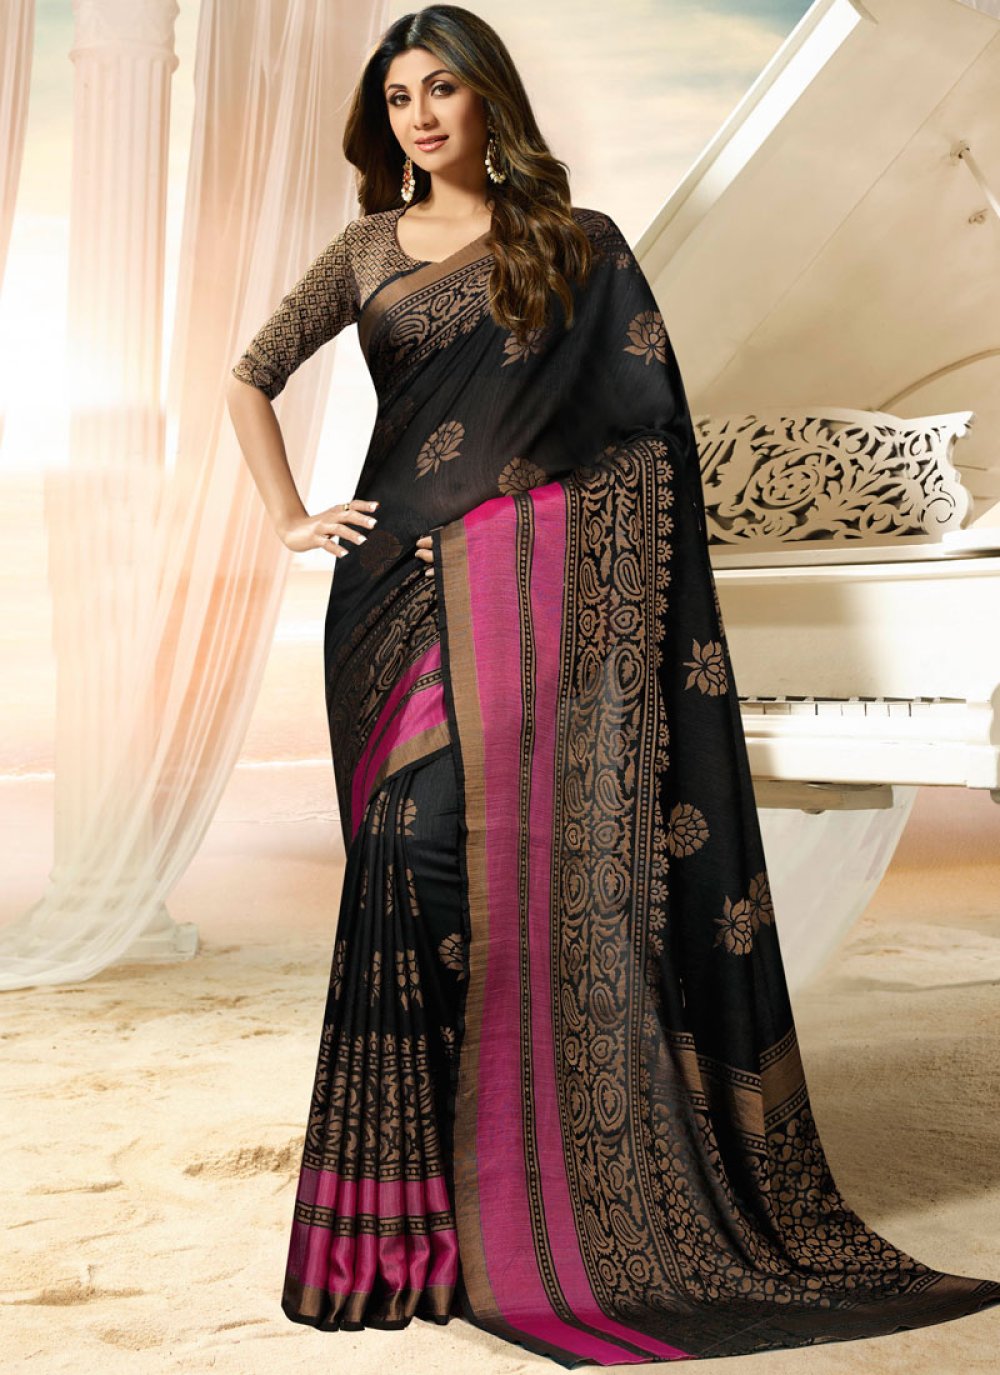 Shilpa Shetty Kundra: Saree Styles That Only This Gorgeous Can Pull Off -  Urban Asian